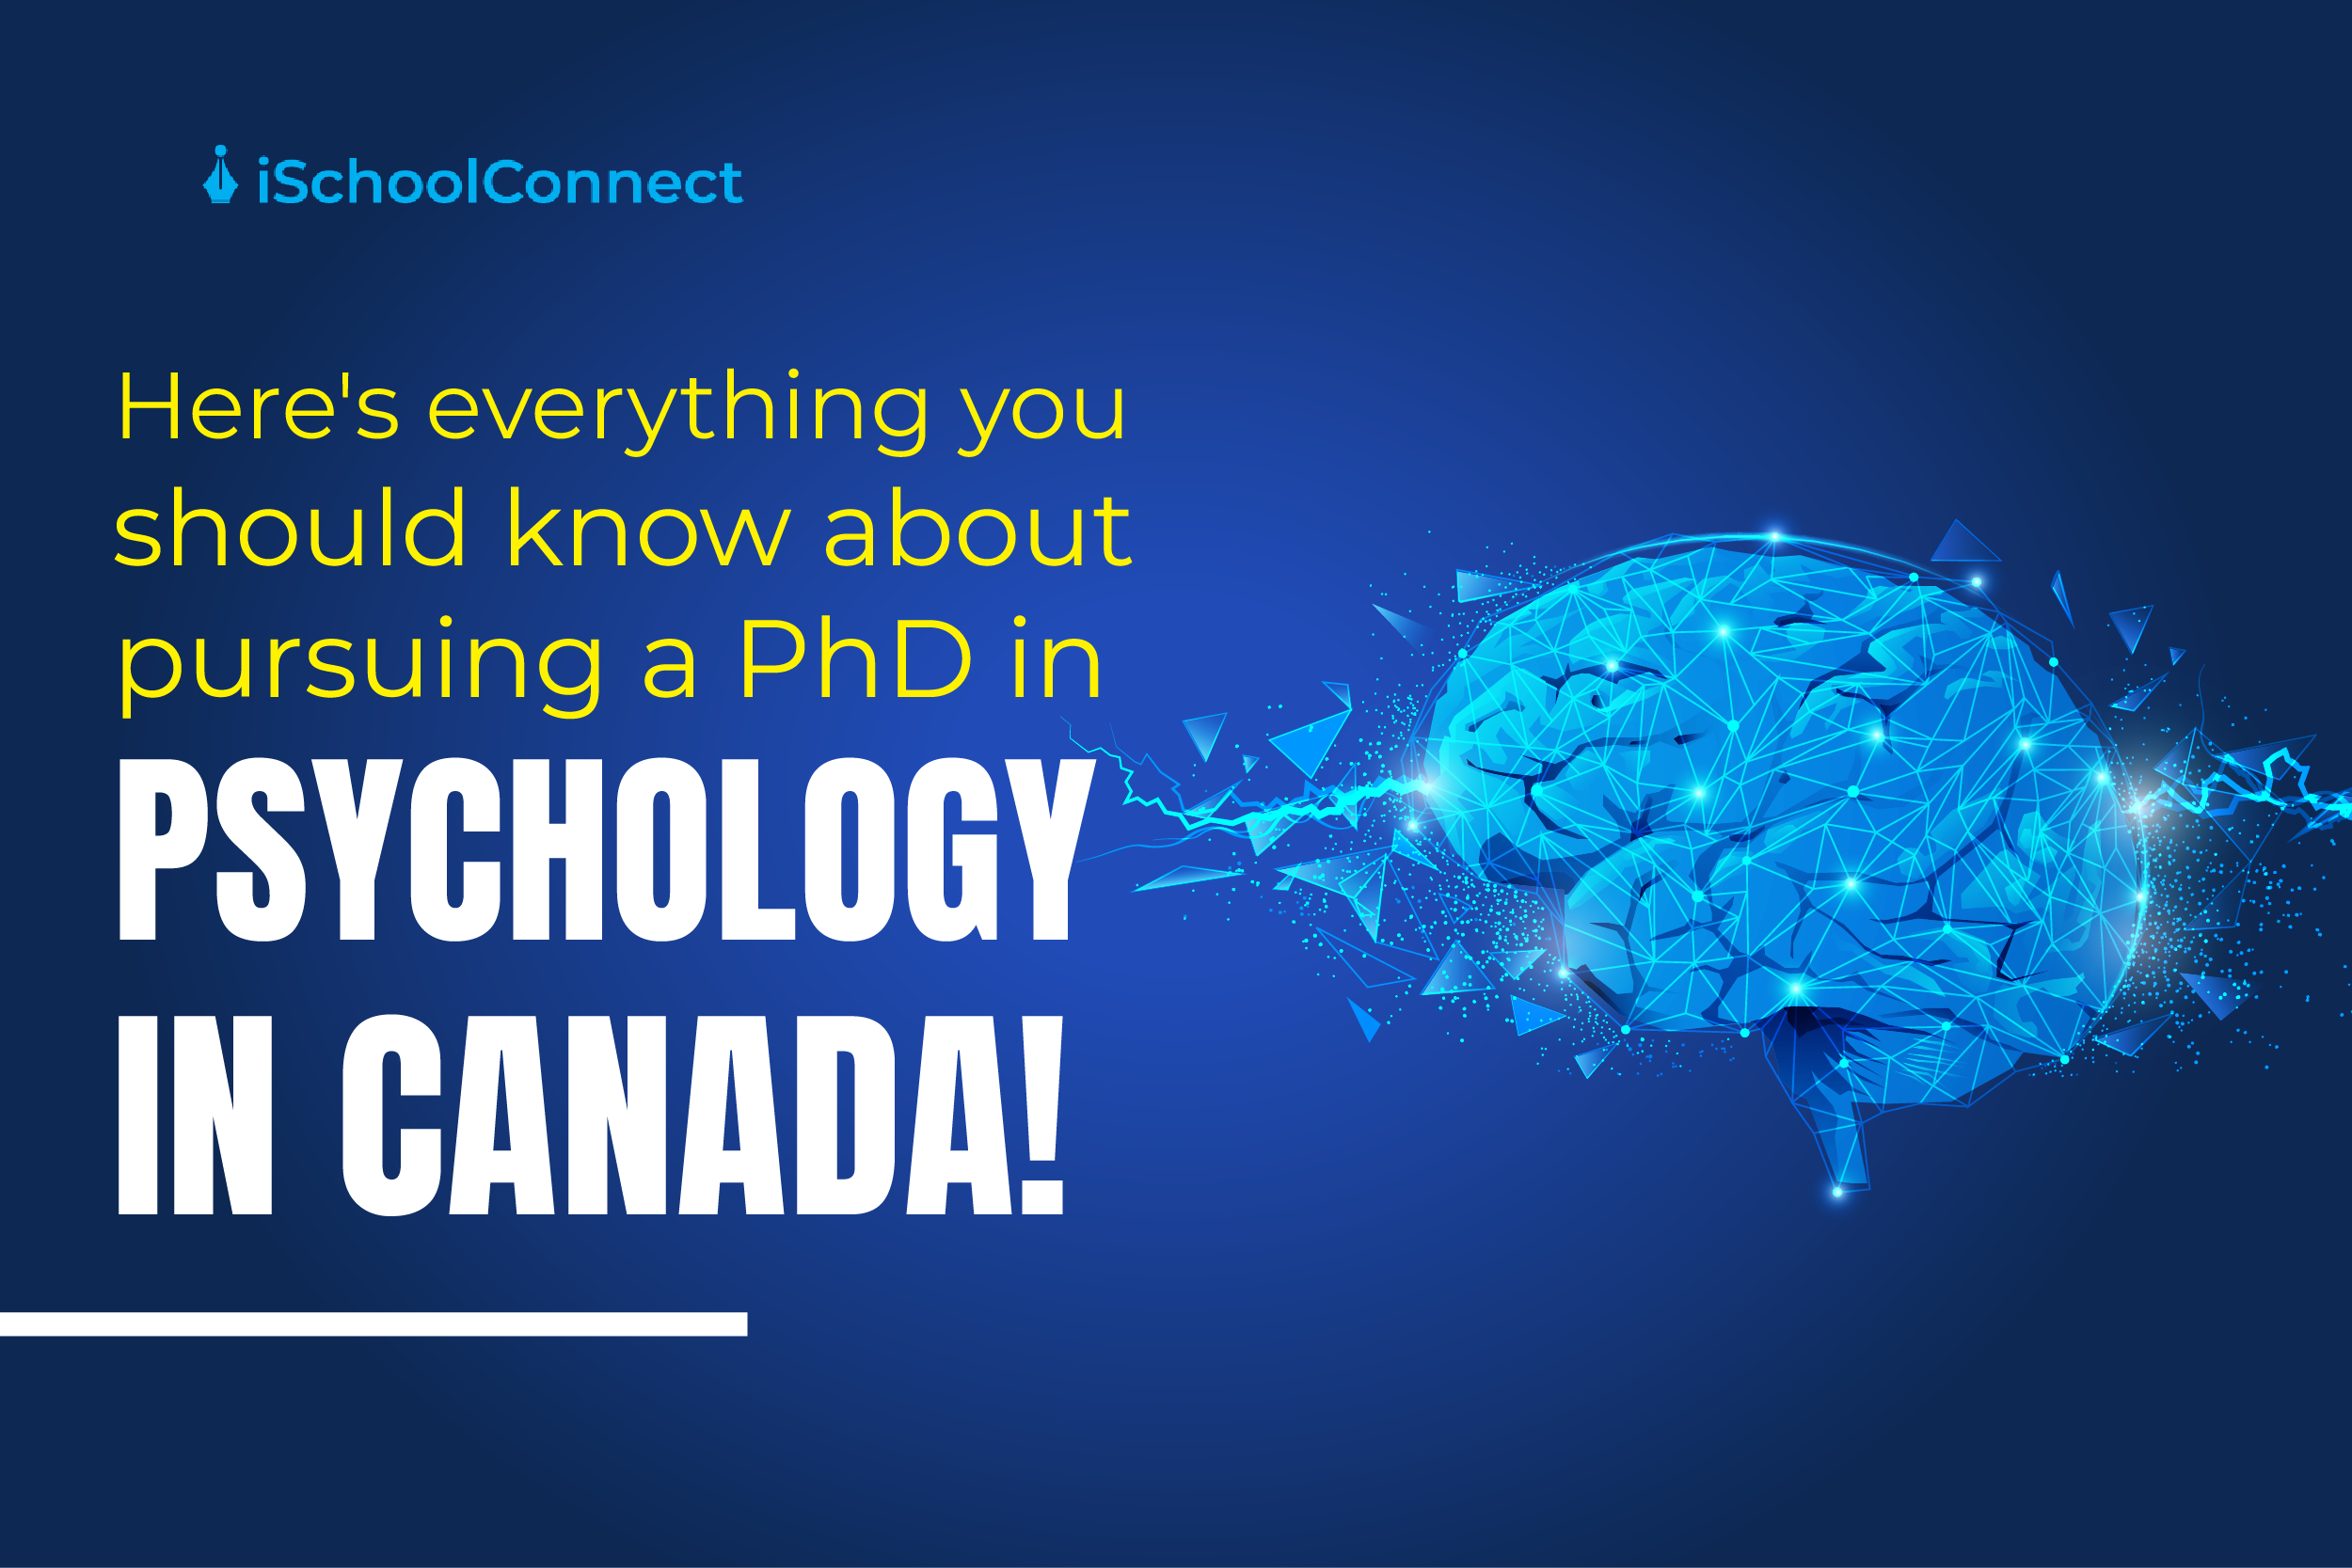 phd counselling psychology canada